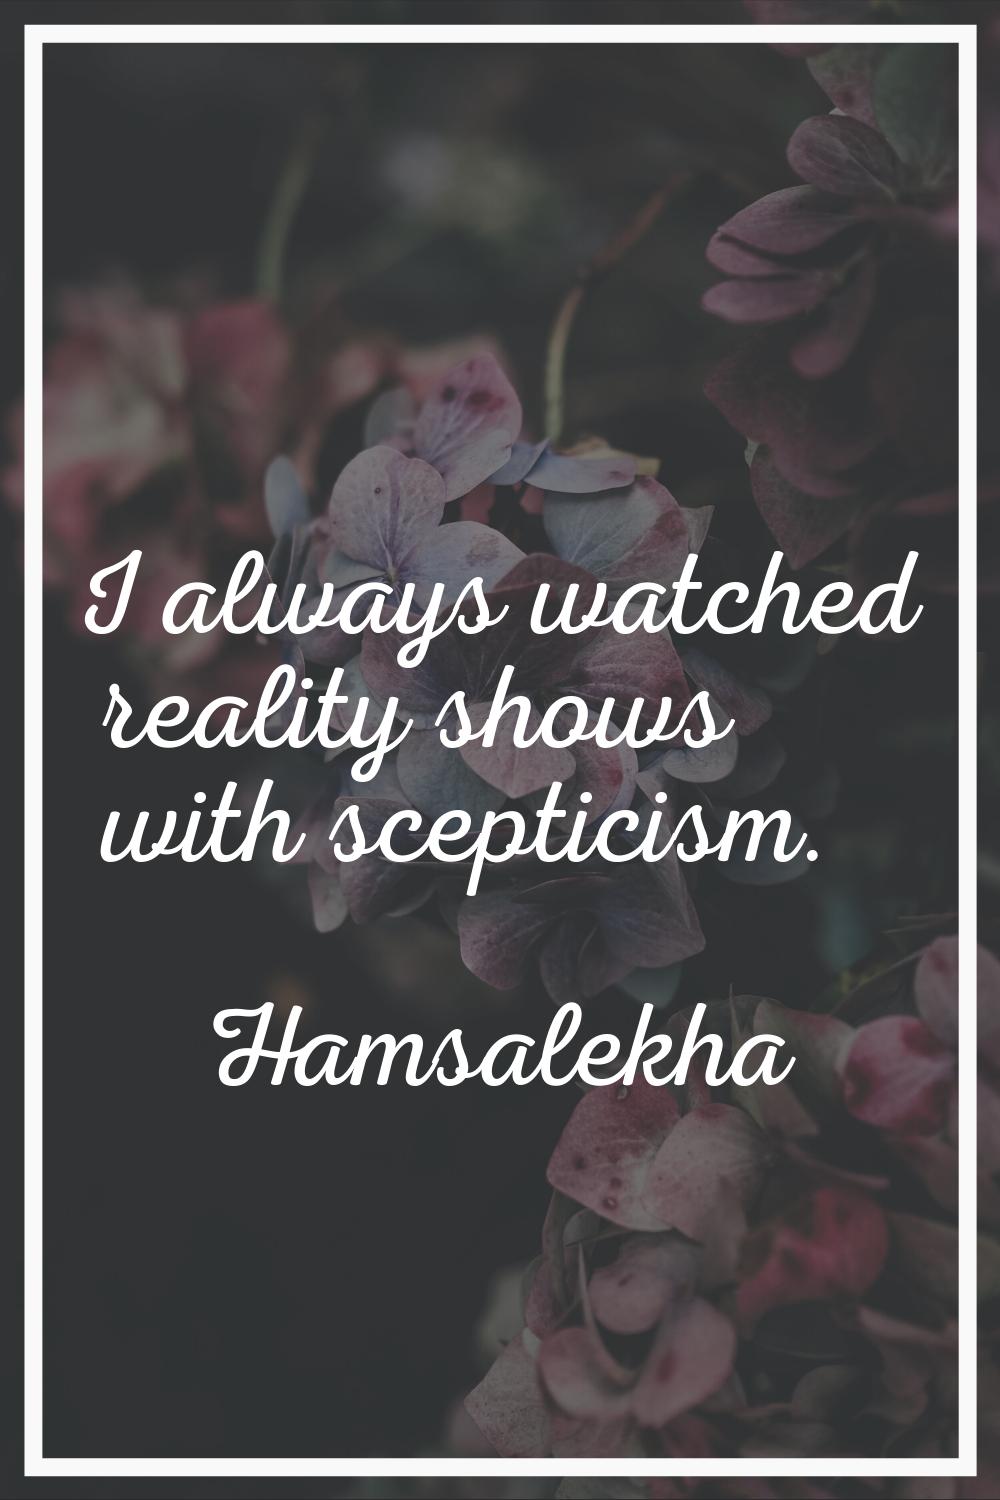 I always watched reality shows with scepticism.